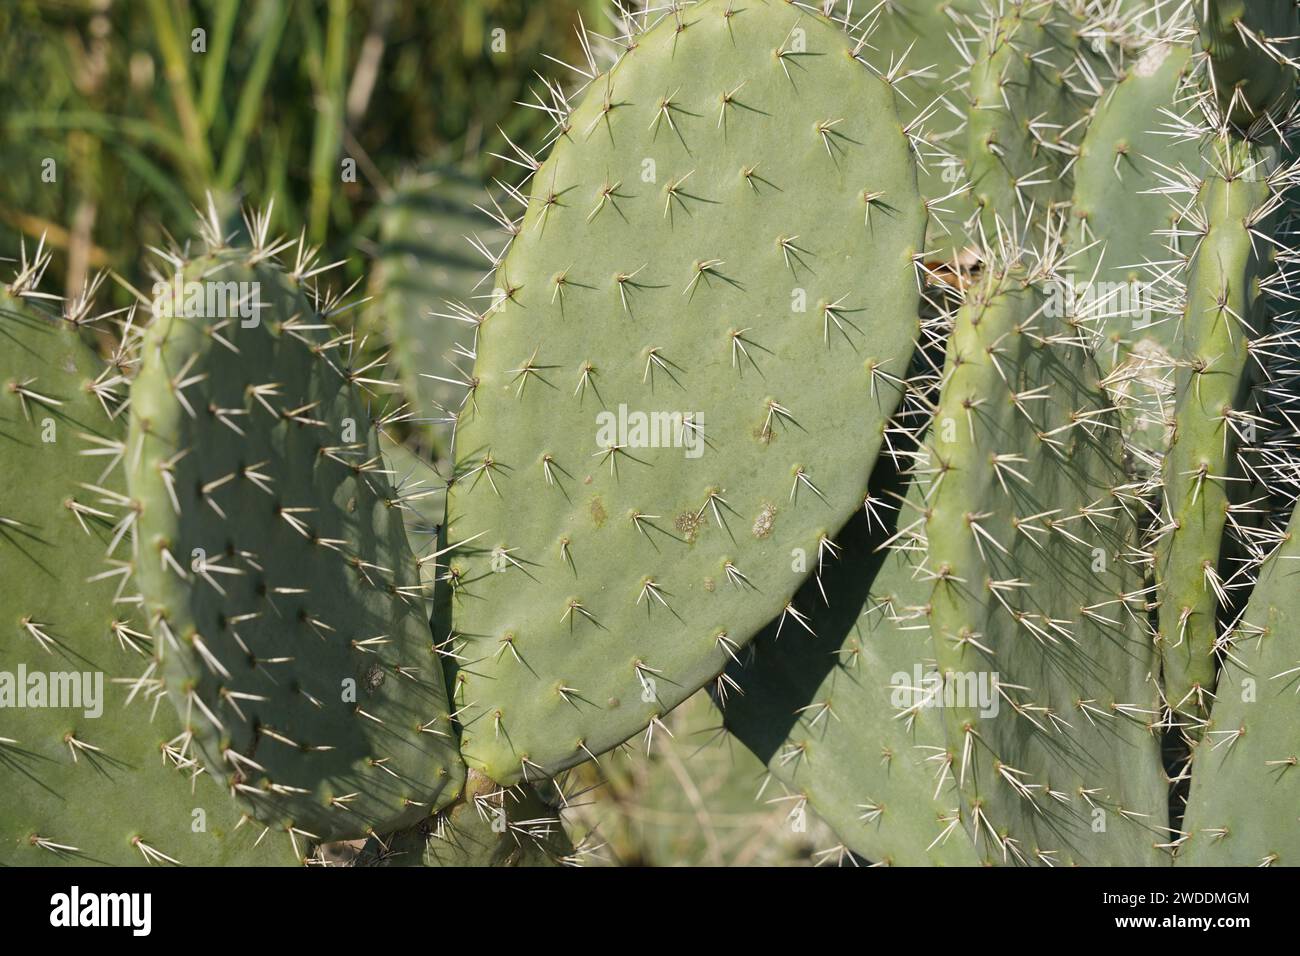 Prickly pear cactus close up with cactus spines. Stock Photo